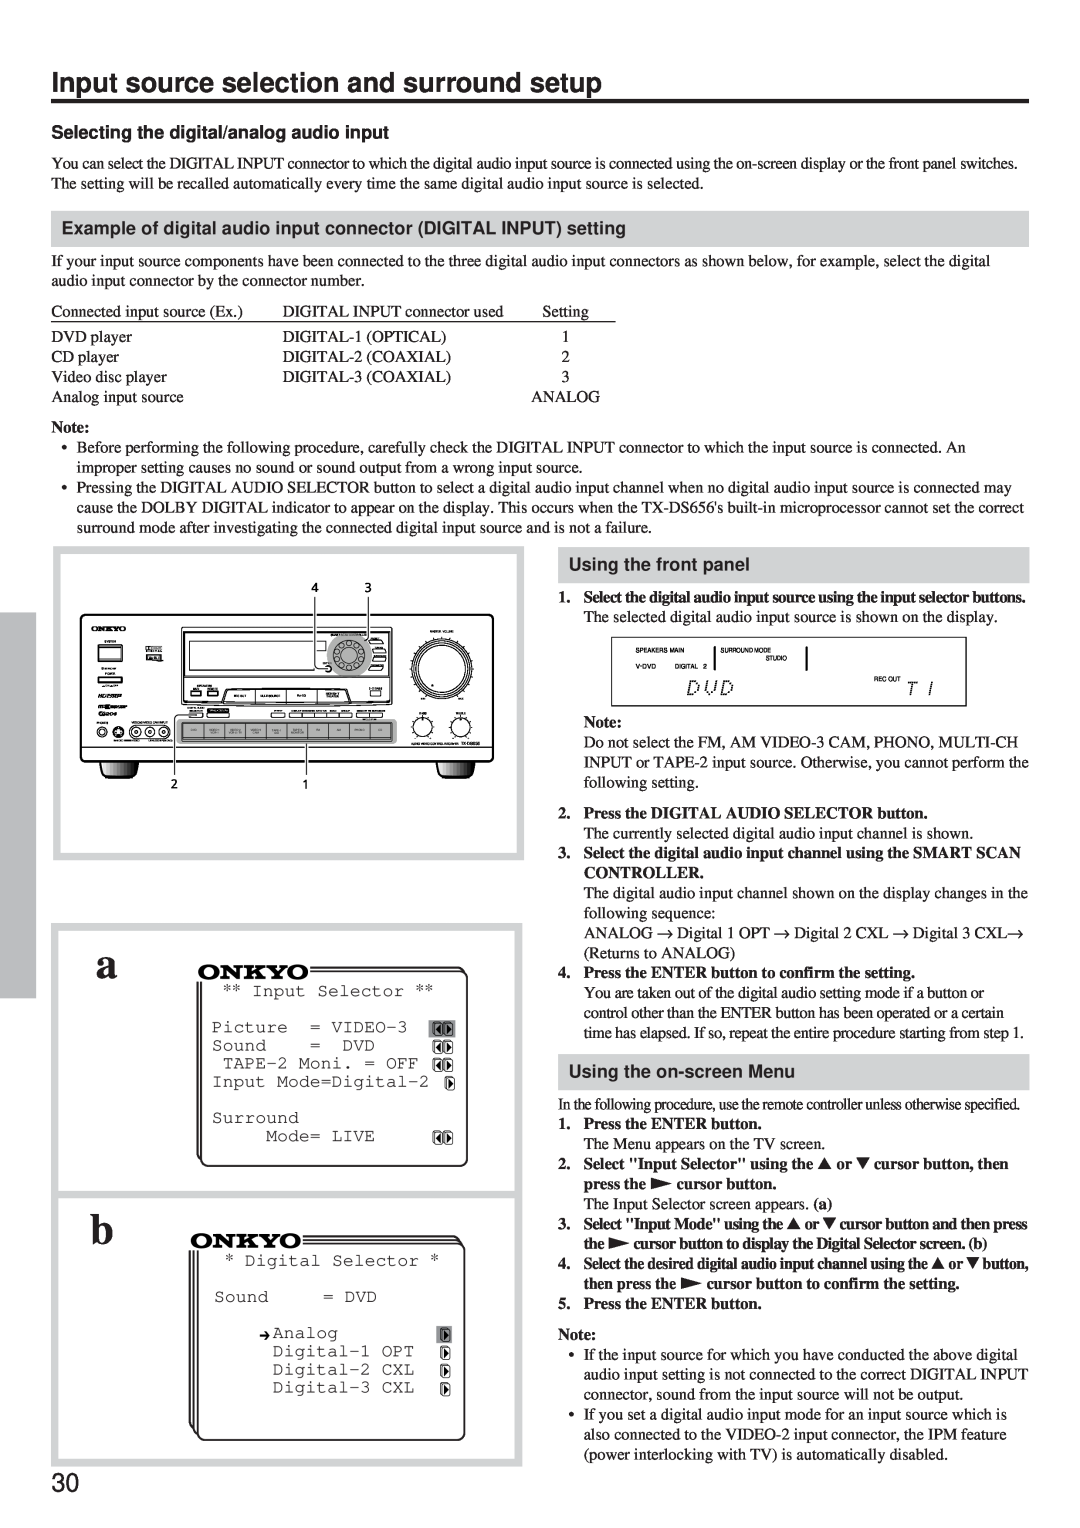 Onkyo TX-DS656 Input source selection and surround setup, Selecting the digital/analog audio input, Mode= LIVE, Sound 